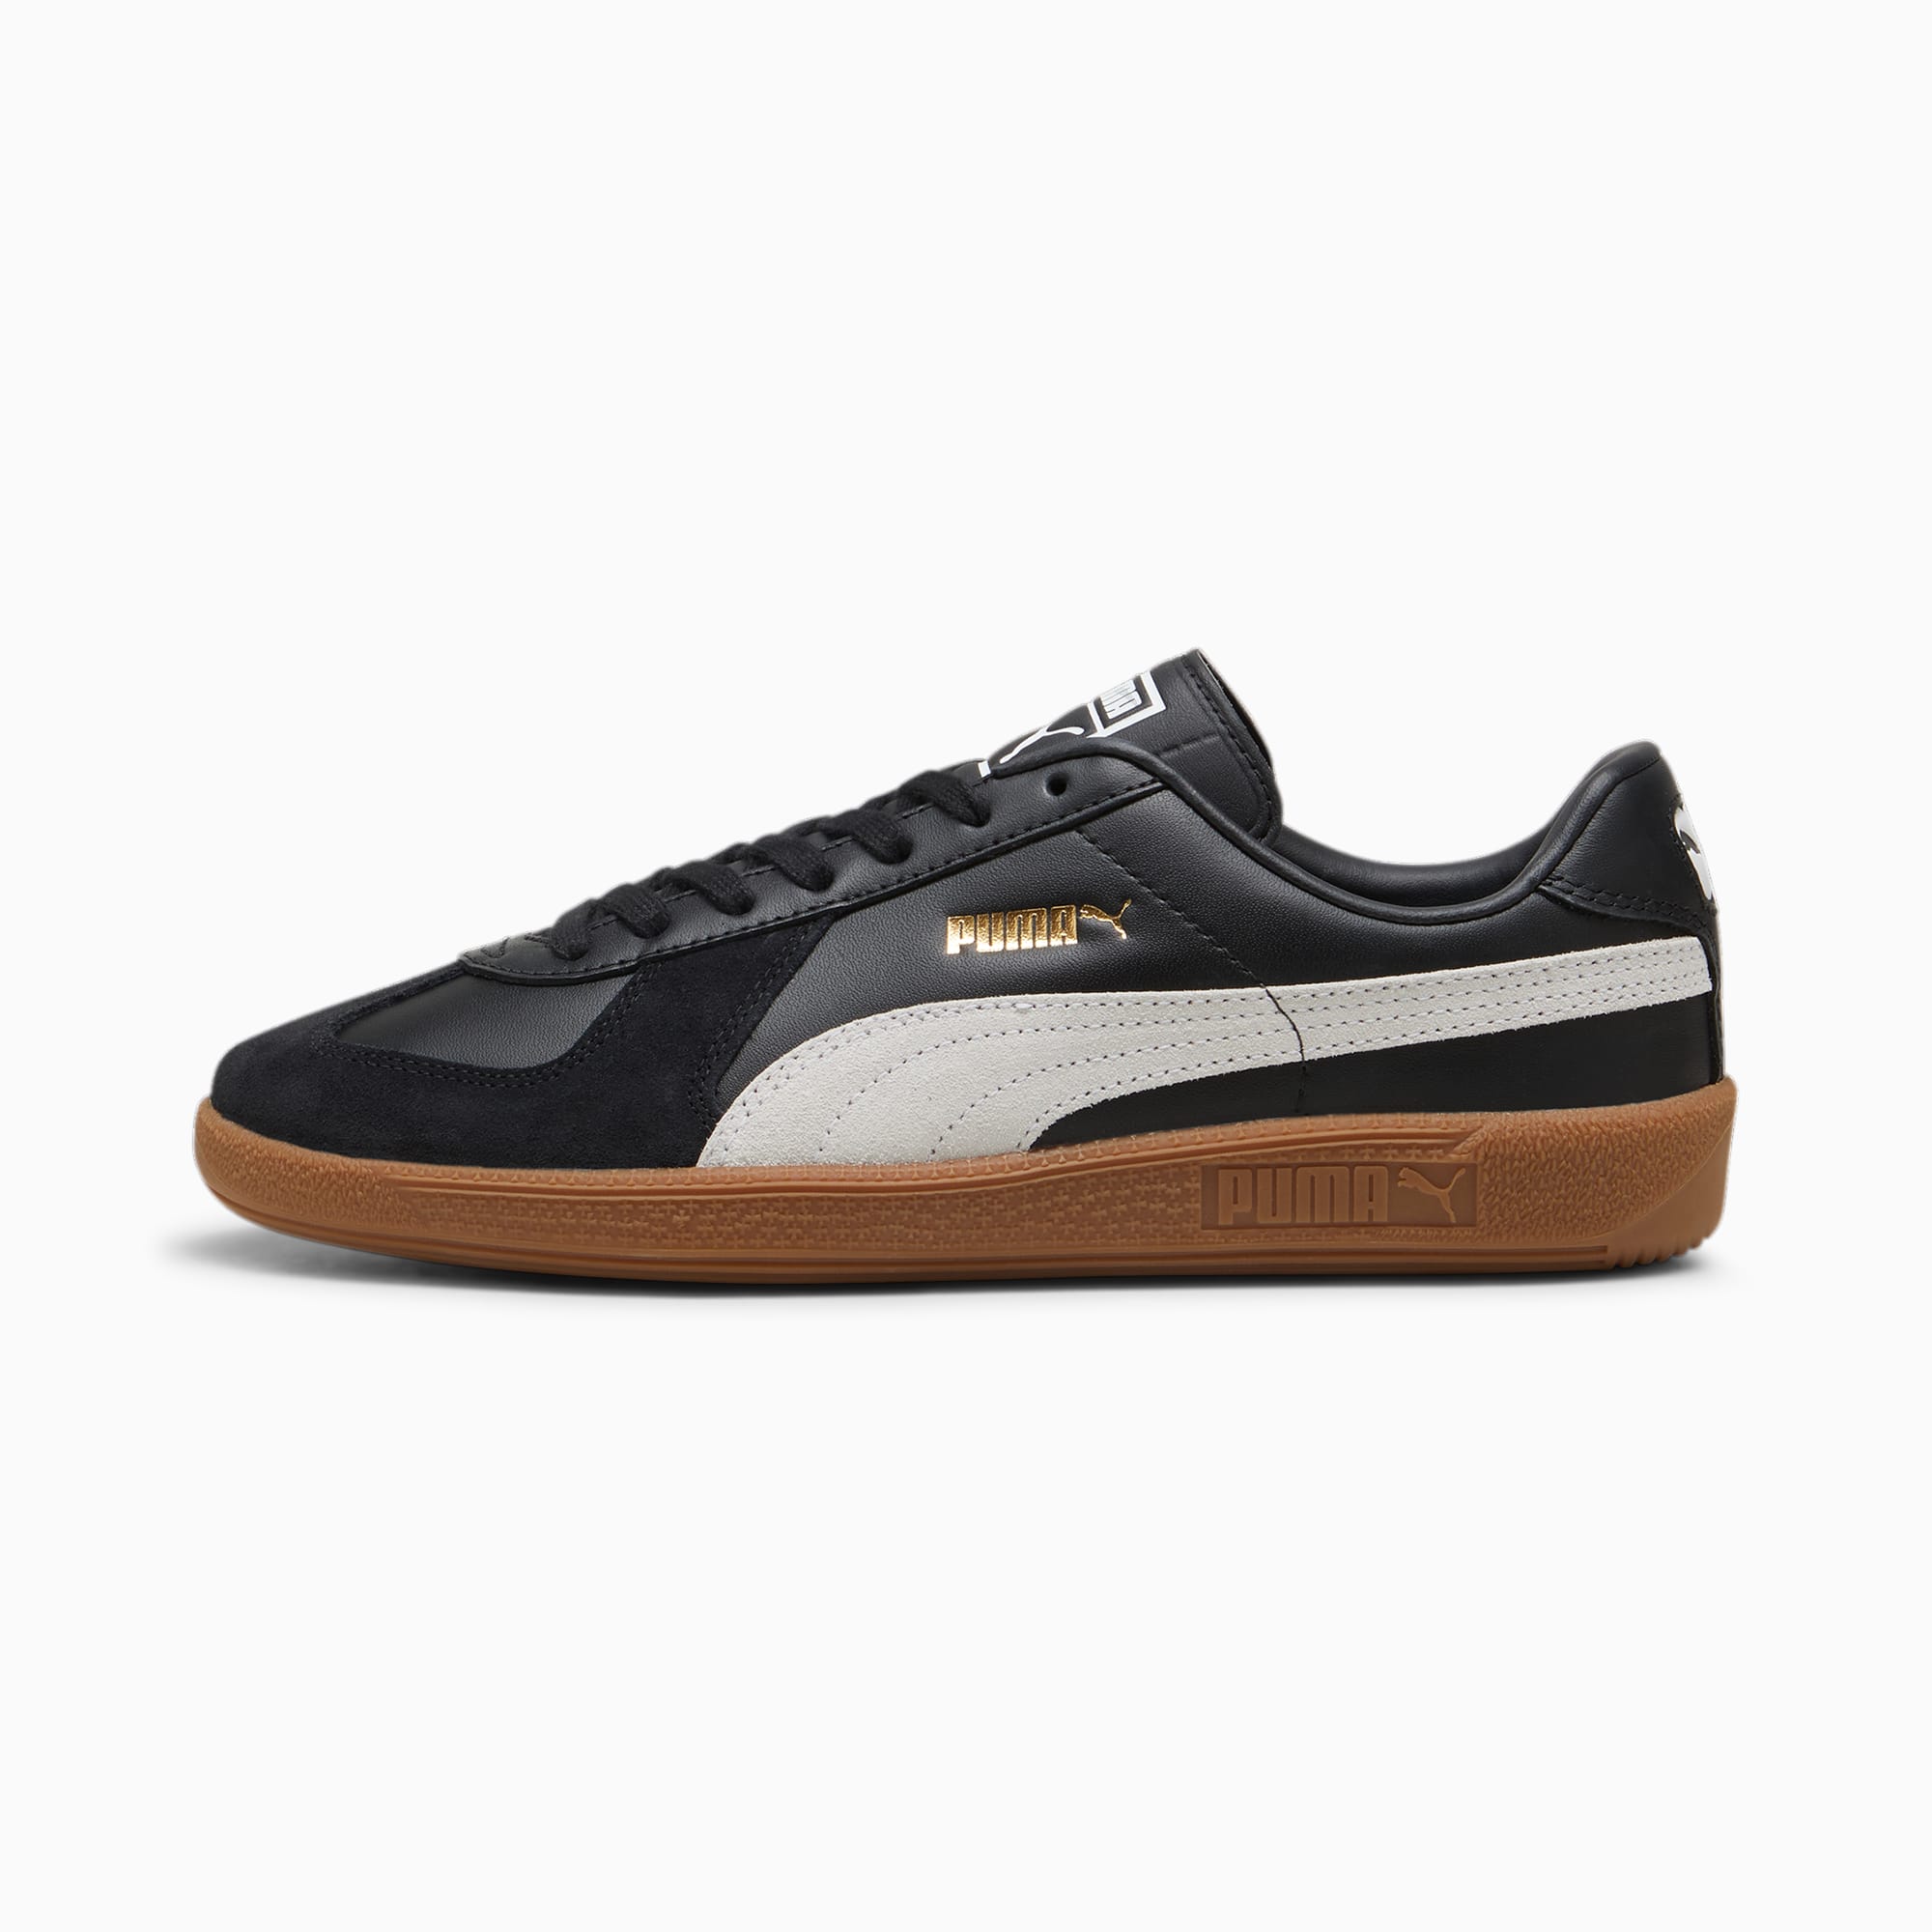 Women's PUMA Army Trainer Sneakers, Black/White/Gum, Size 39, Shoes